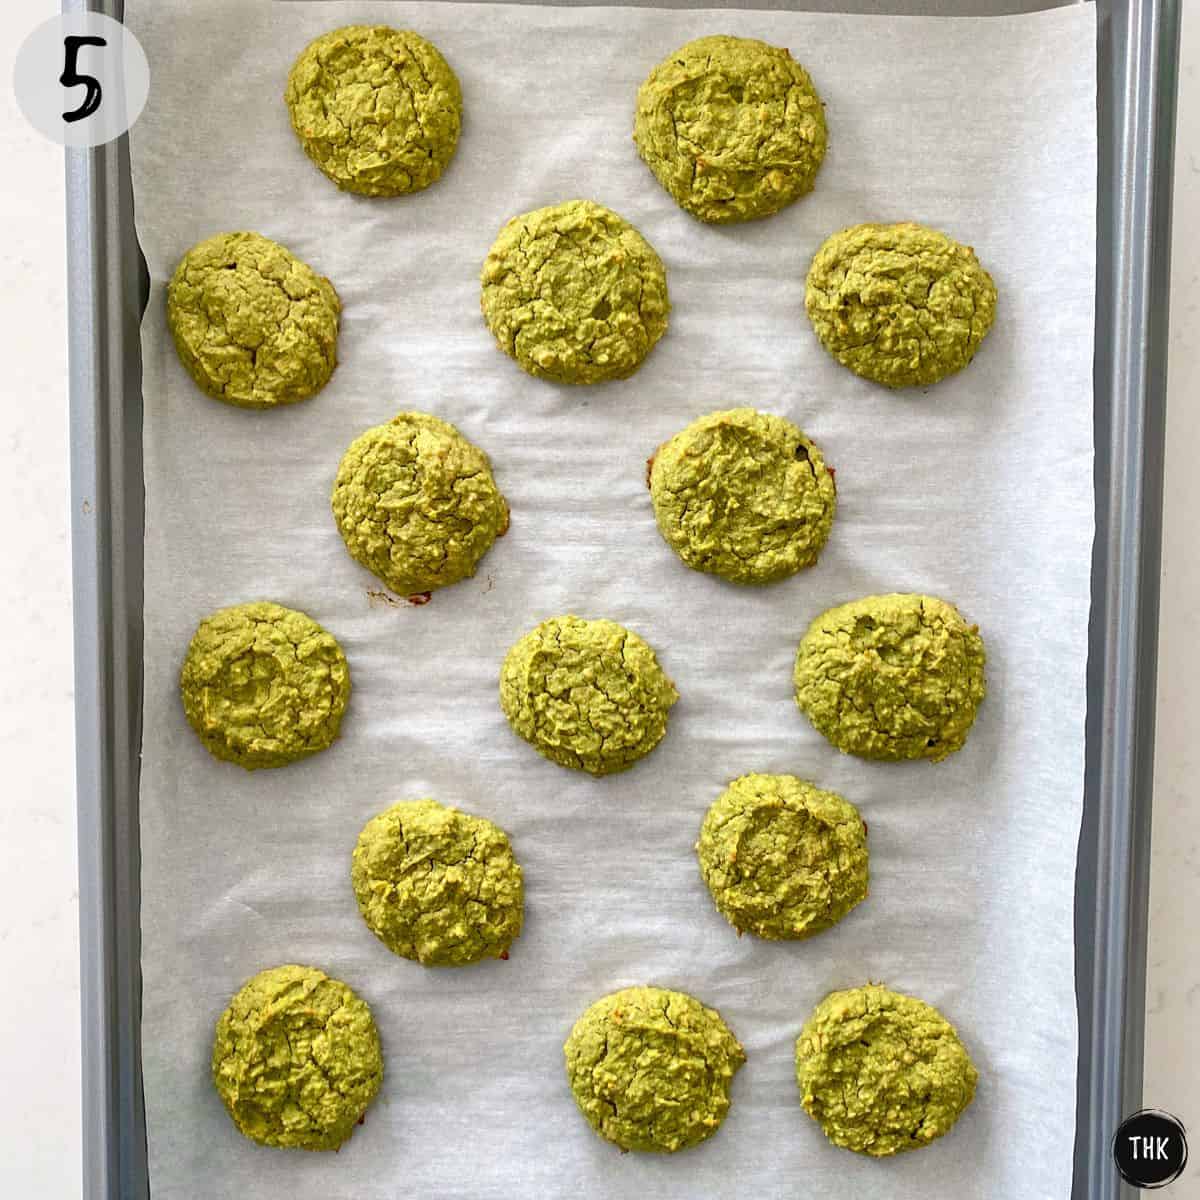 Baked green cookies on baking tray.